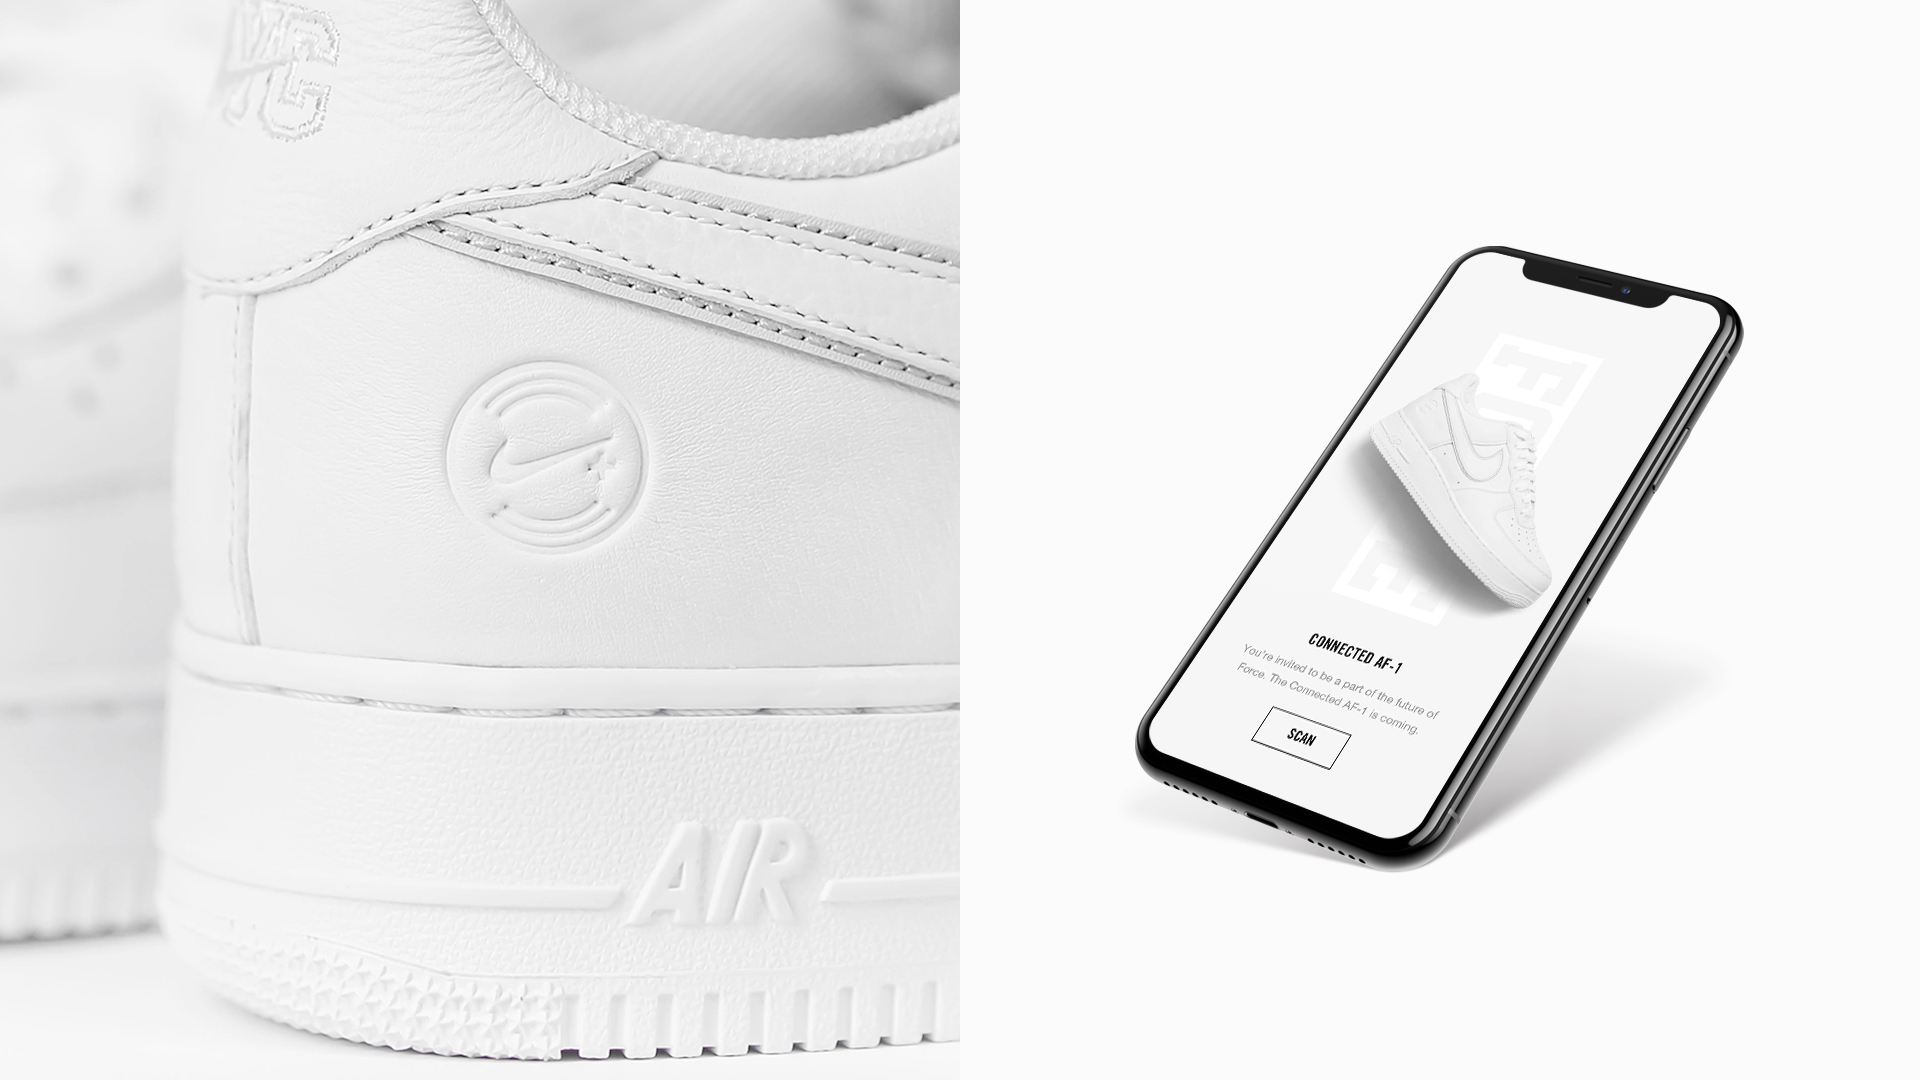 nike plus connect